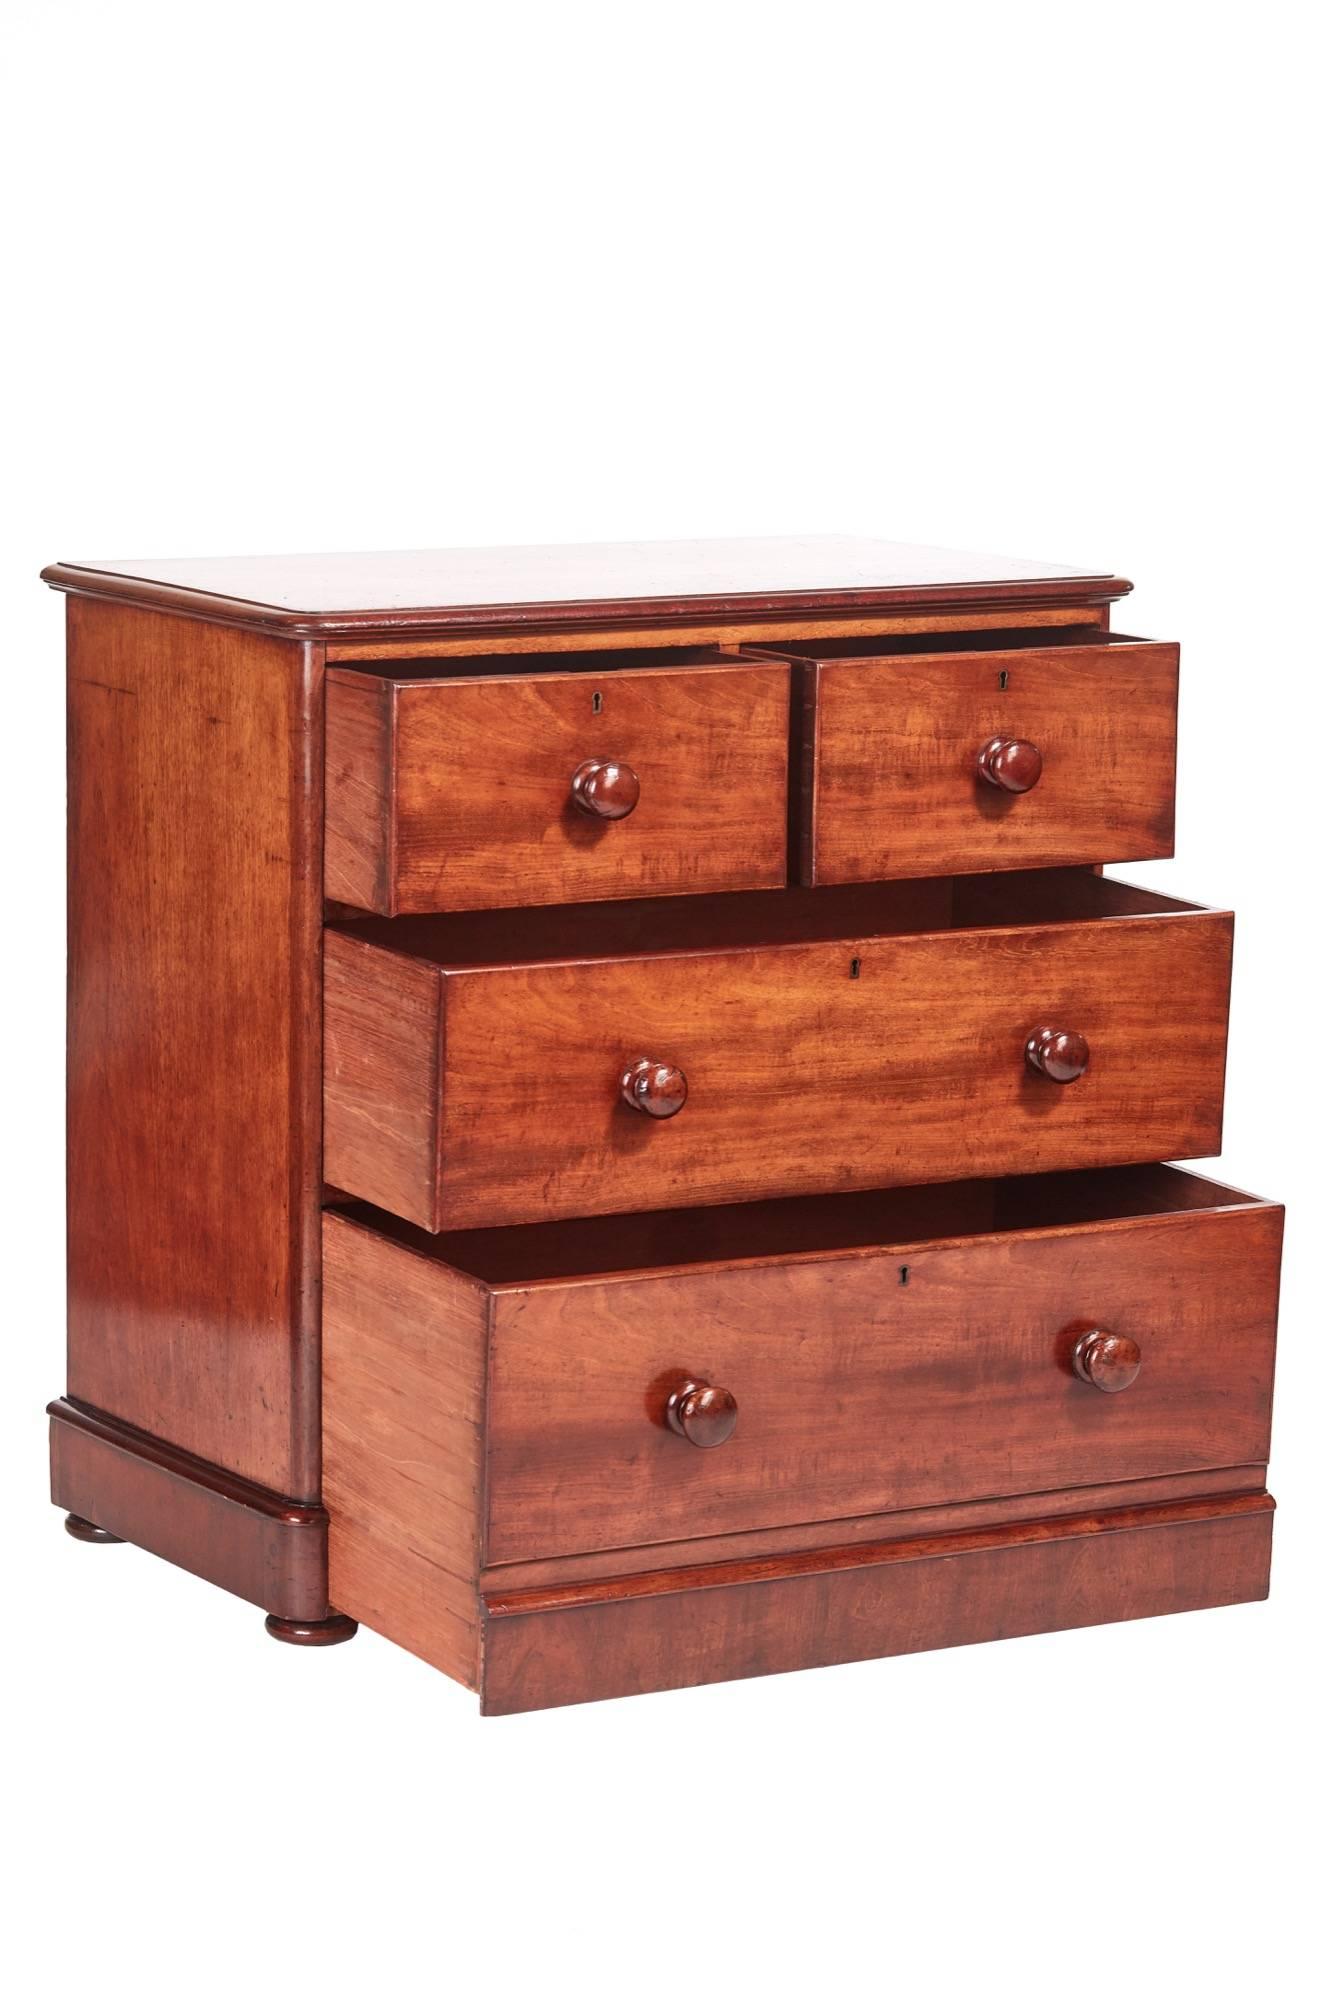 European Quality Victorian Mahogany Chest of Drawers